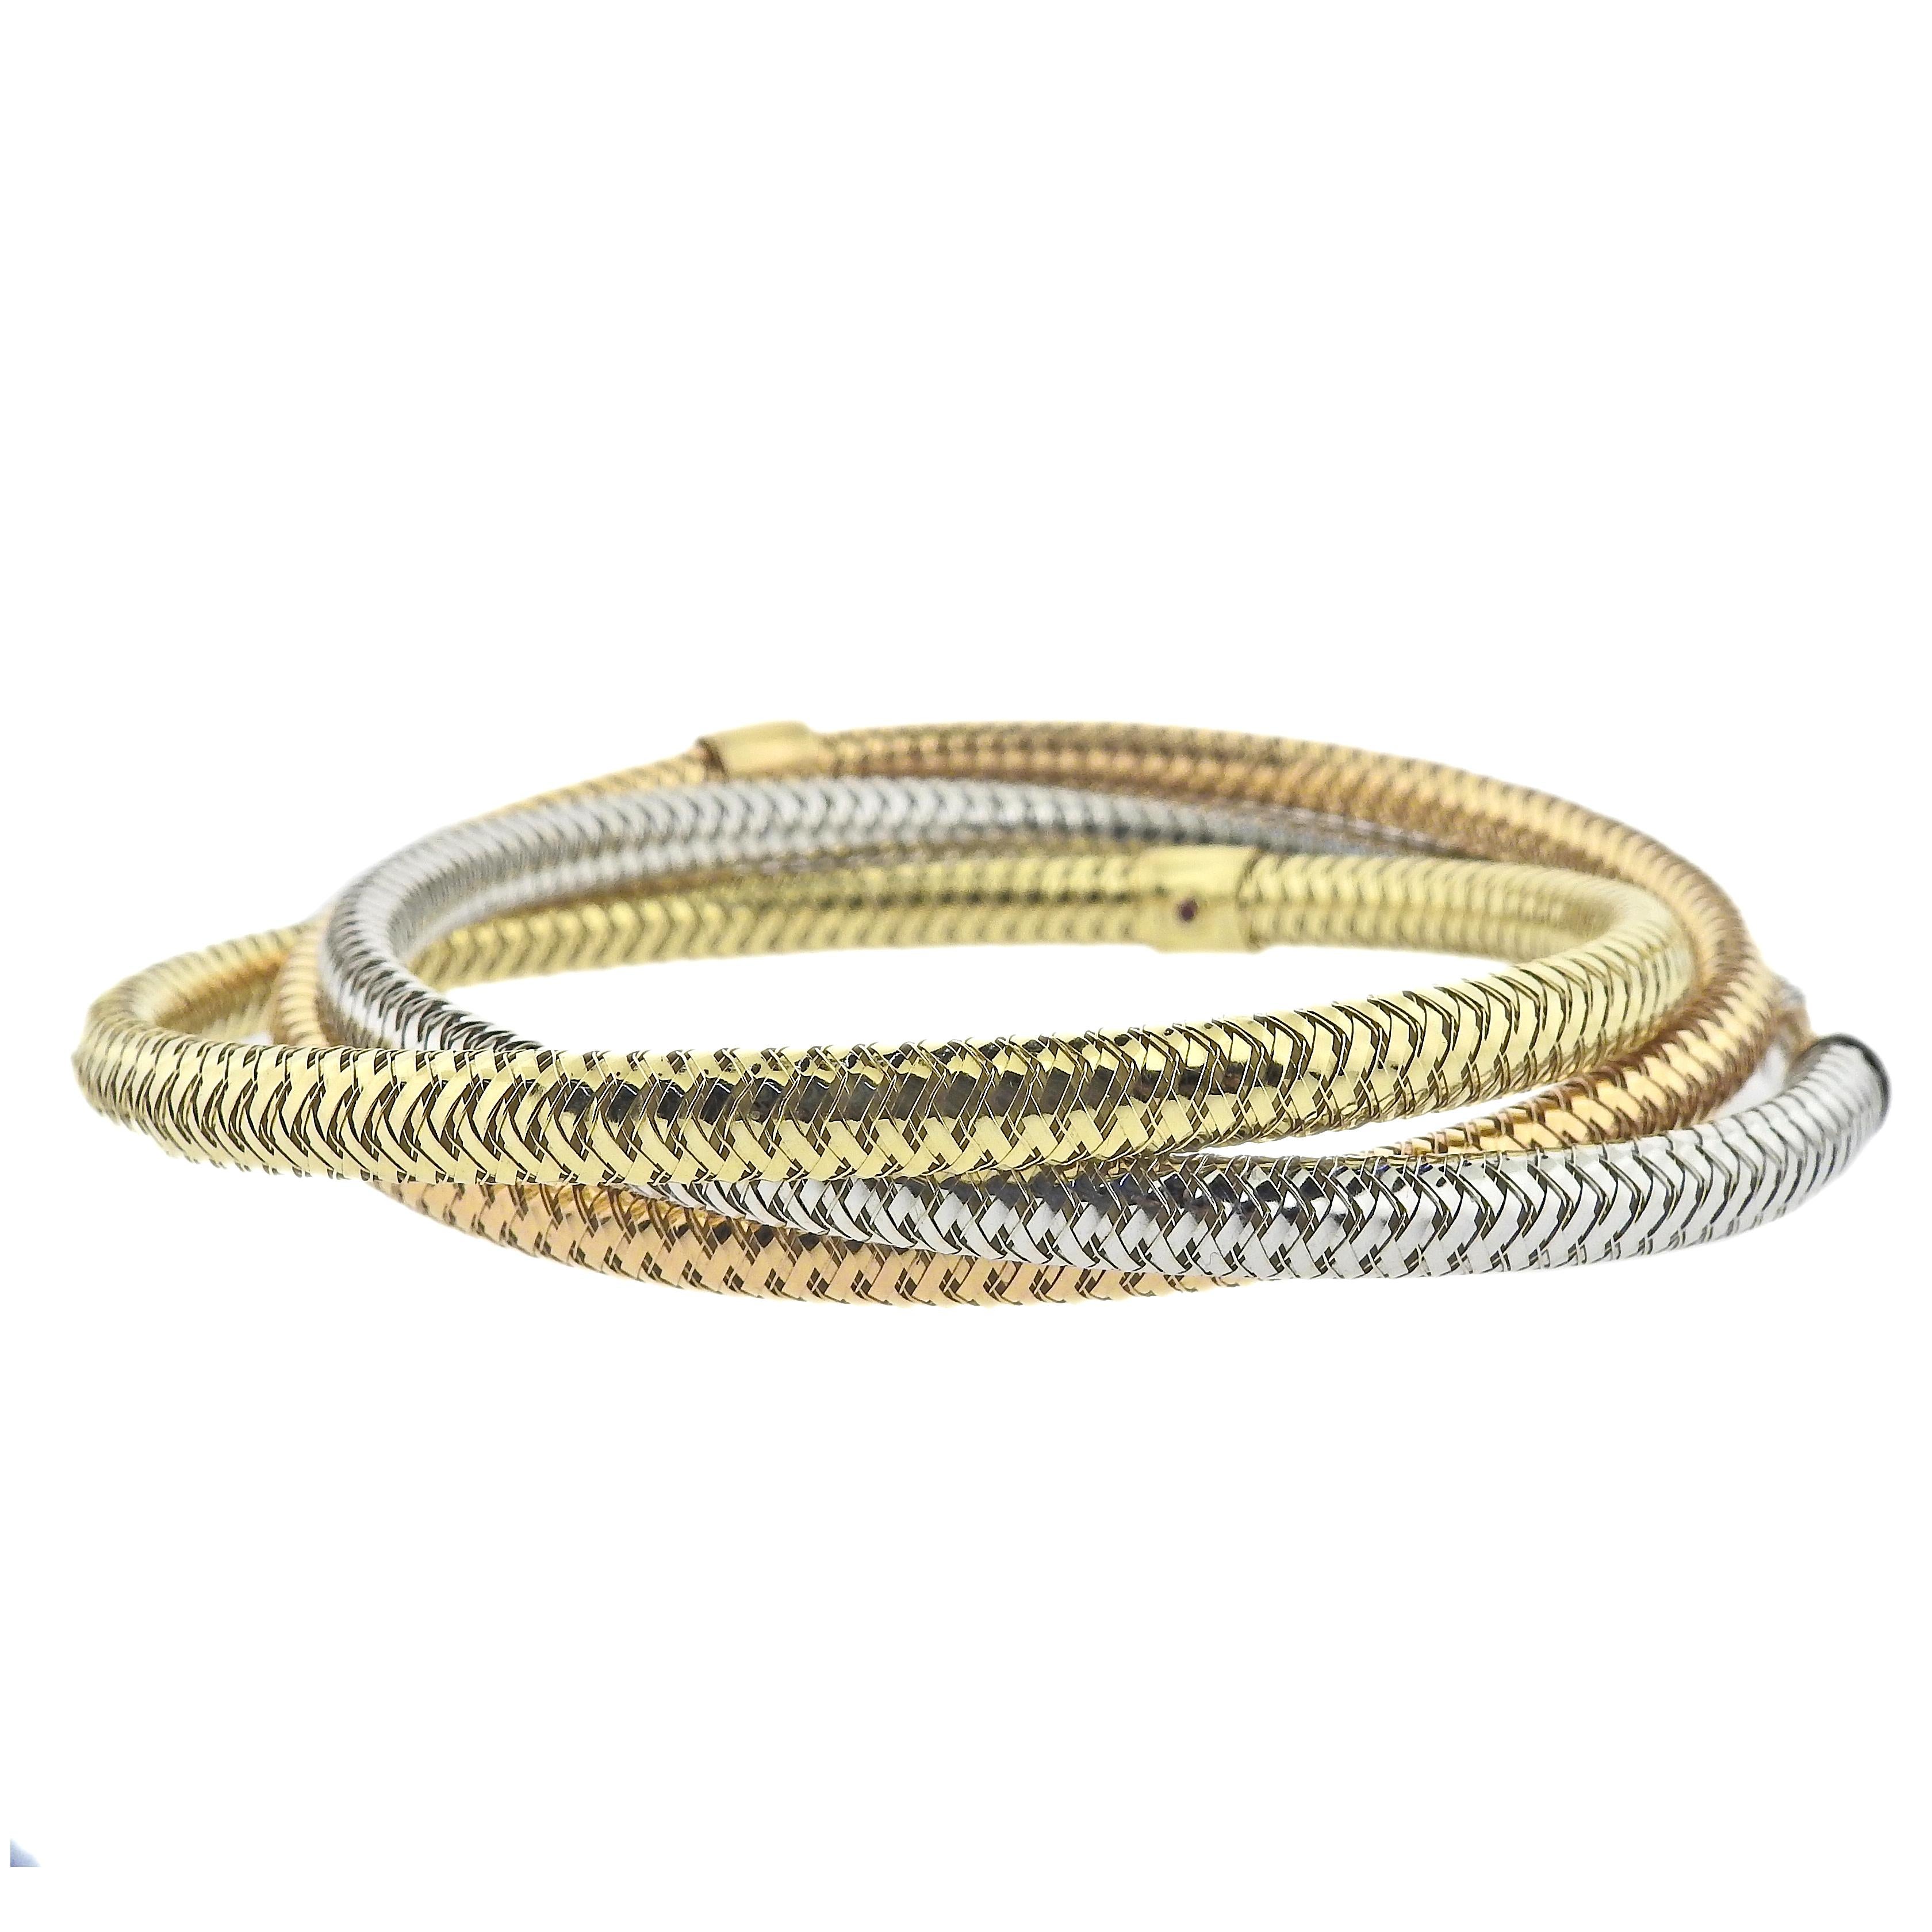 Roberto Coin Primavera collection 18k yellow, rose and white gold mesh bangle bracelet. Internal measurement is 2 3/4